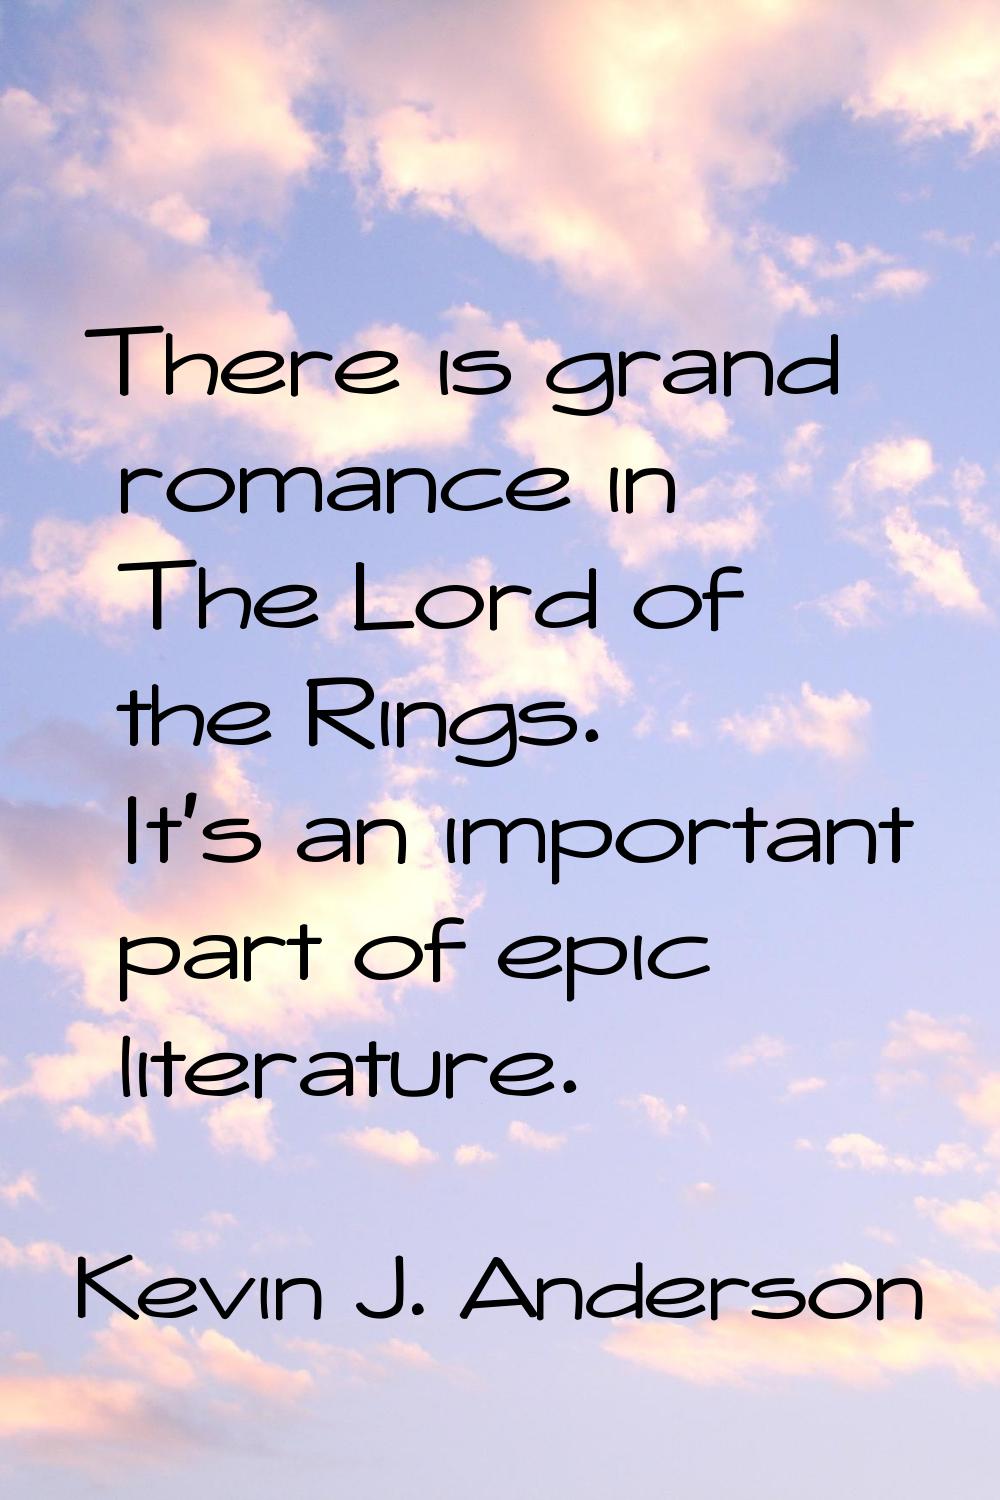 There is grand romance in The Lord of the Rings. It's an important part of epic literature.